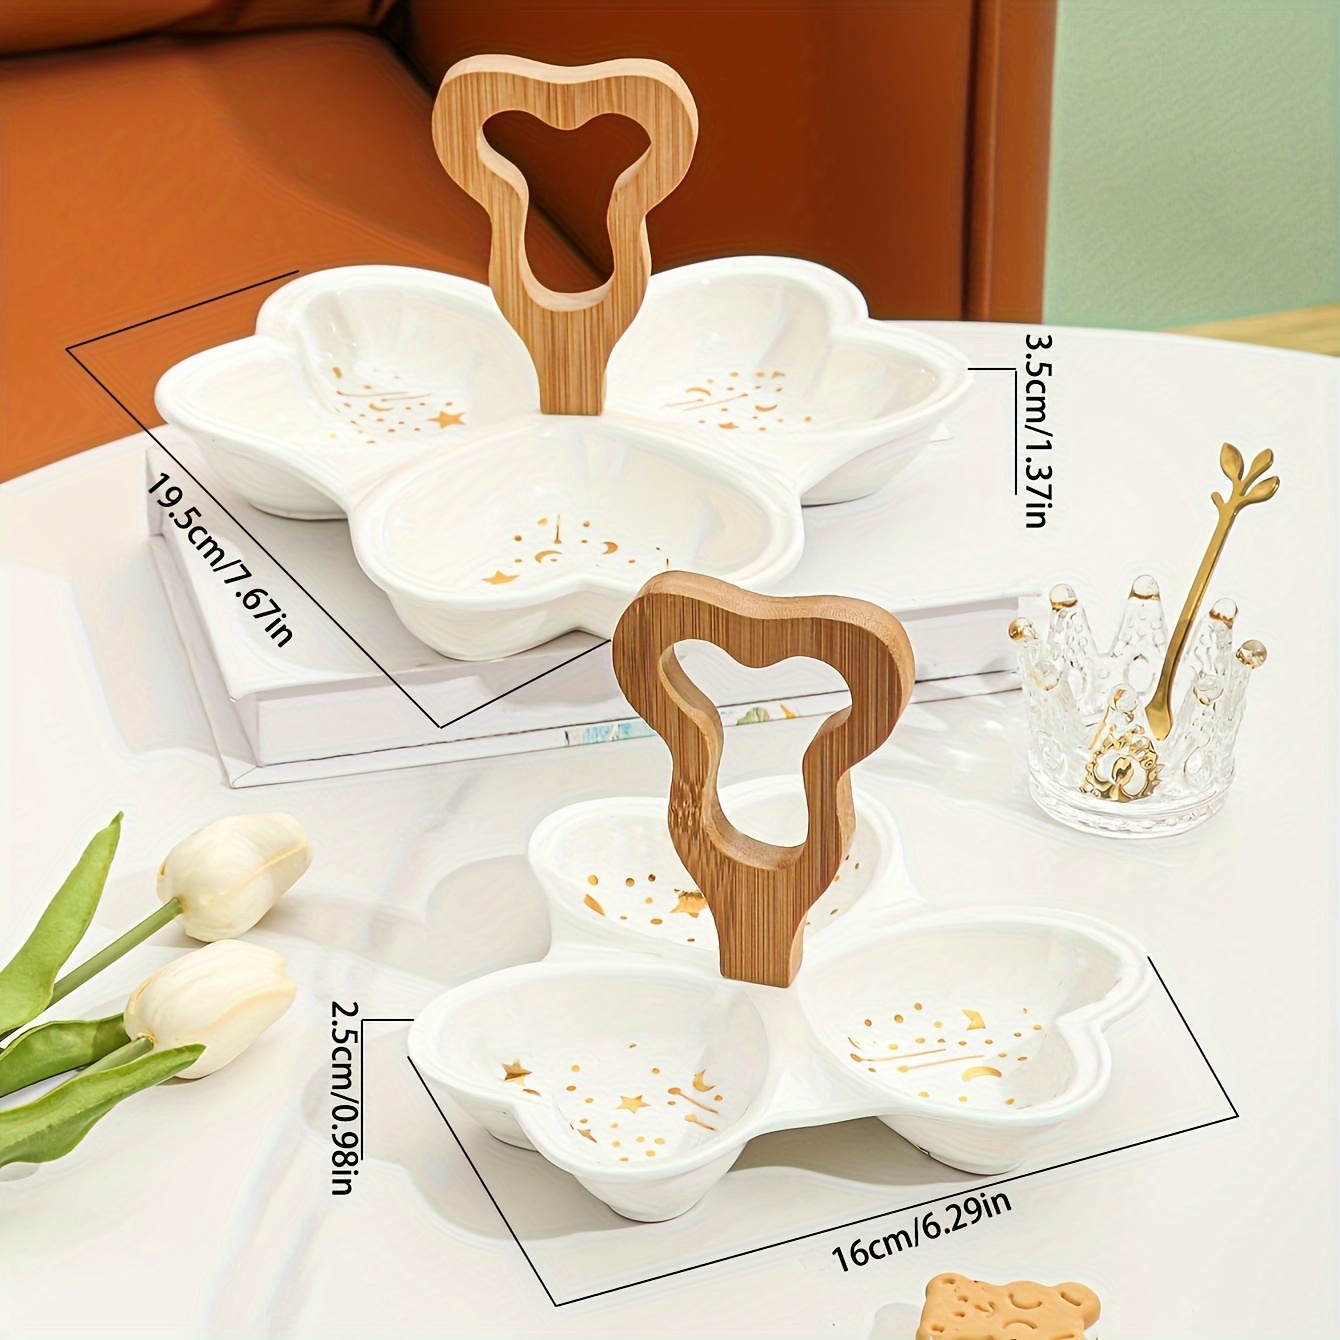 Tupp Zimbabwe - Tee's Irresistibles - Serve sweet moments Our Legacy  Serving Platter is the perfect partner for entertaining. It can be used to  serve desserts, cheese, fruit and more. Let us